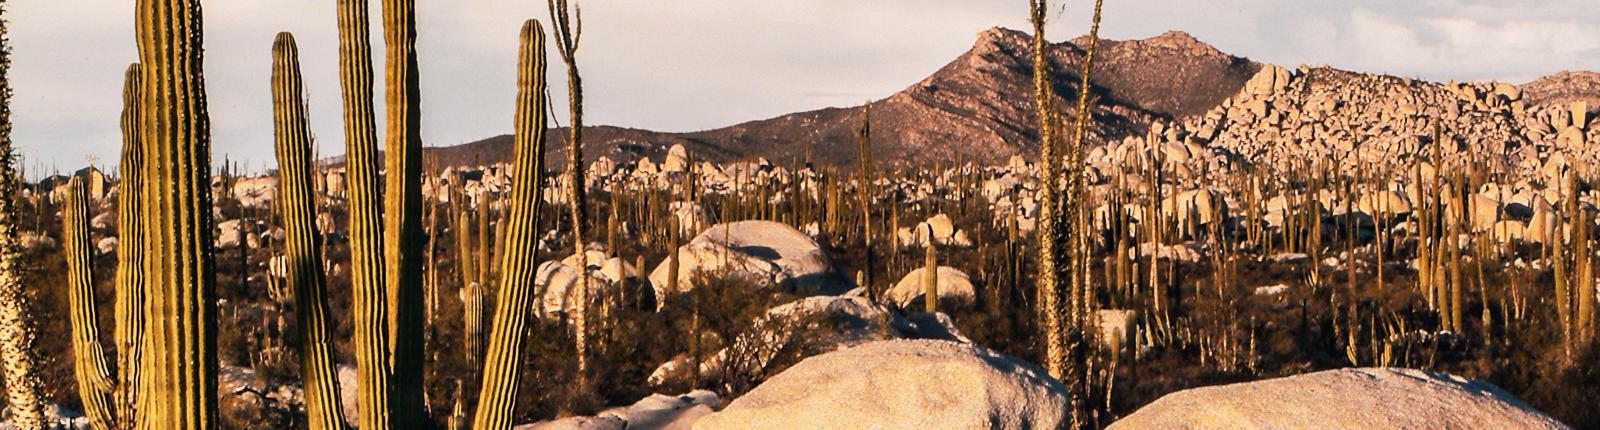 A family of cactus standing tall during a sunset in Ensenada, Mexico